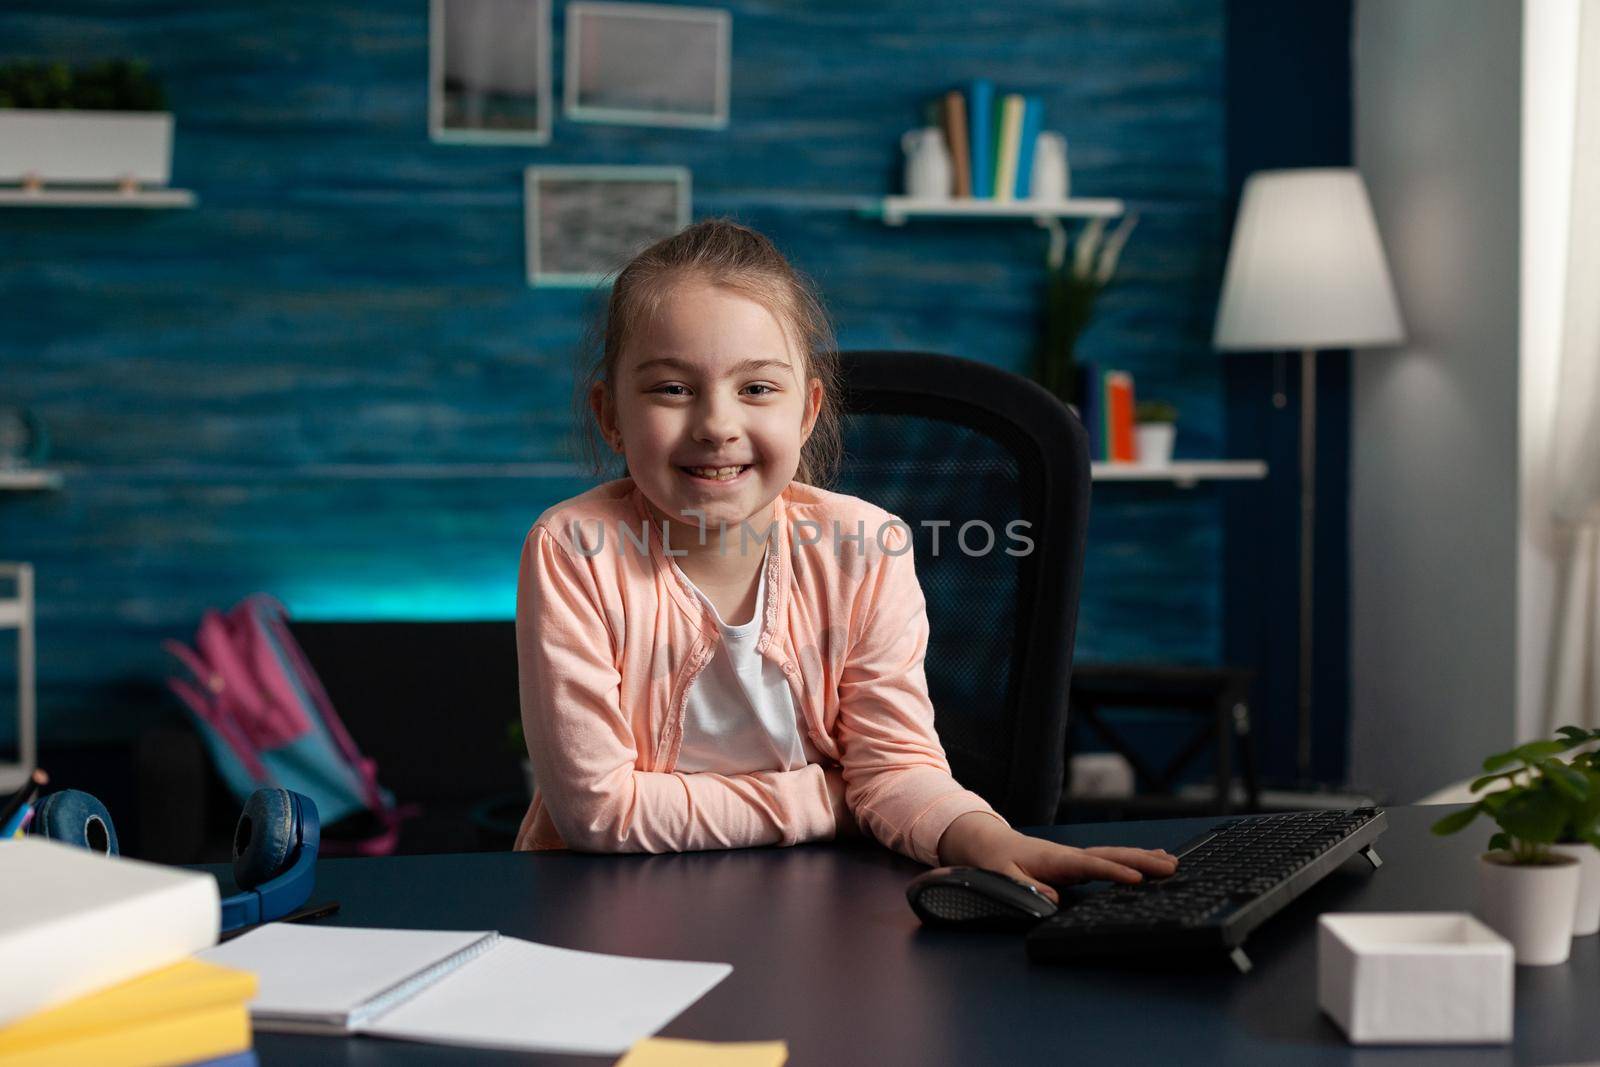 Portrait of smiling little schoolchild sitting at desk table in living room studying online literature lesson working at school homework during home schooling. Child using elearning classwork platform